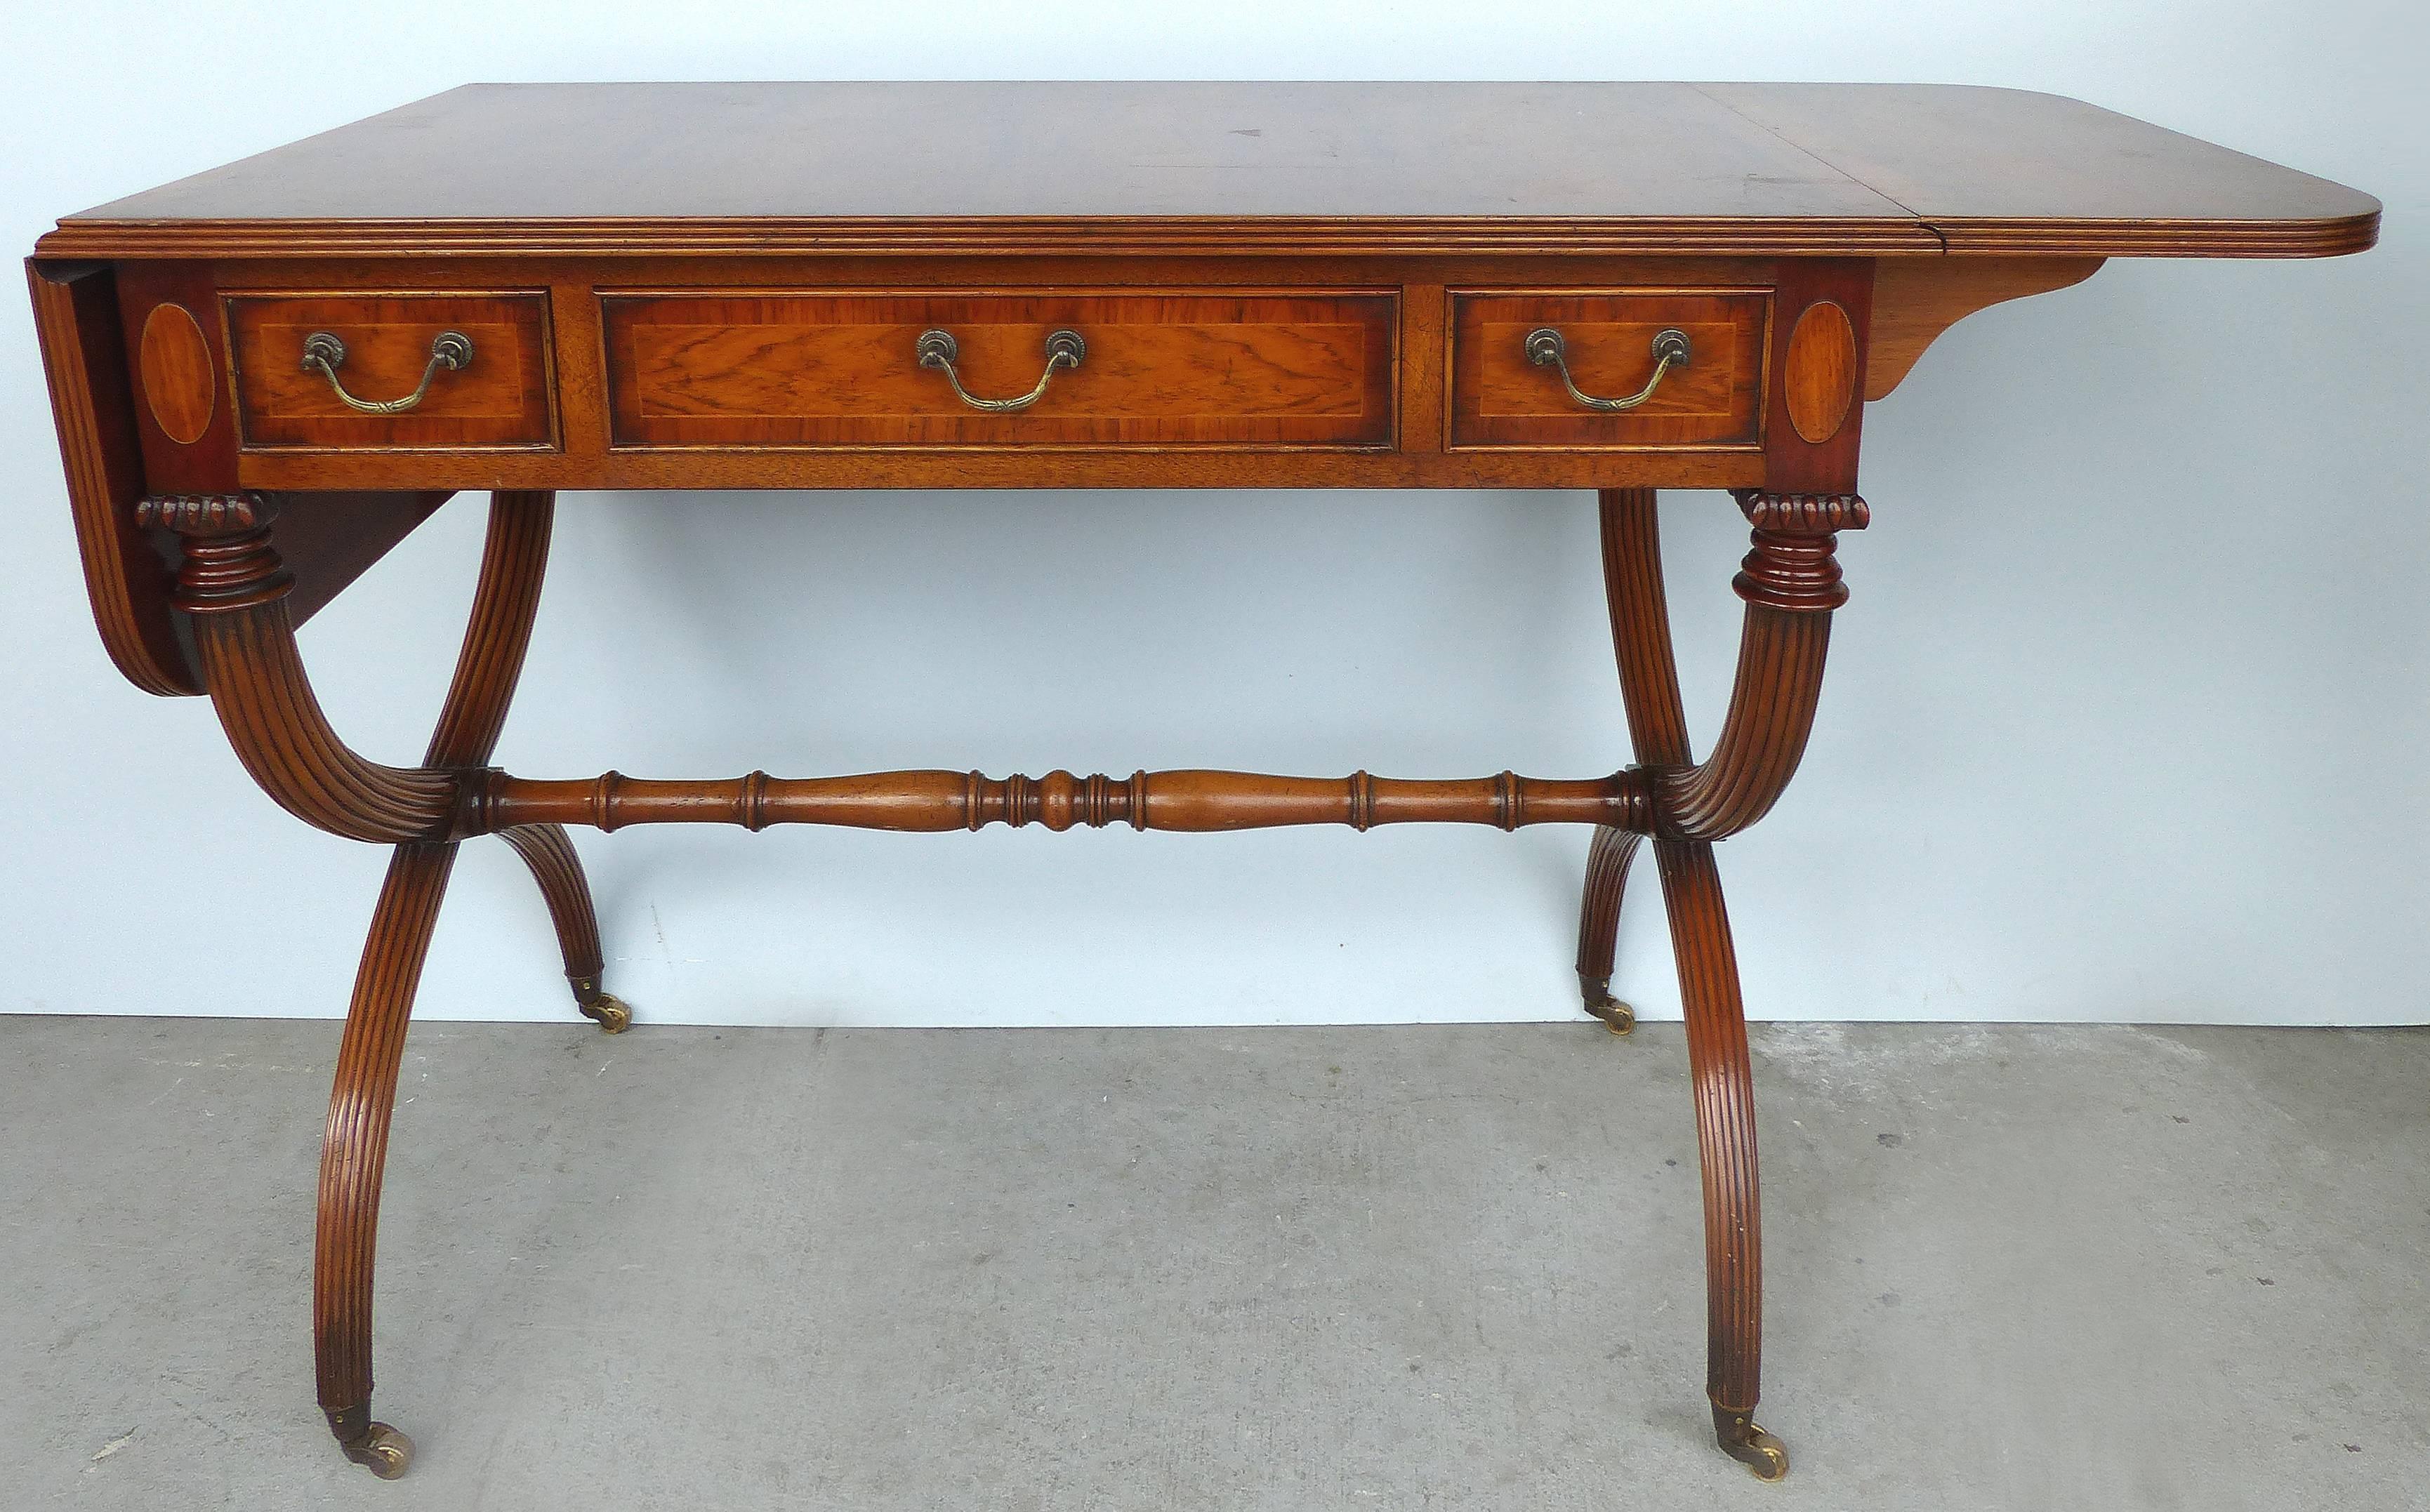 Offered for sale is a drop-leaf, hand-made Regency style server on casters by the E.G. Hudson Furniture Company of Sussex, England. The piece can also be used as a console table perhaps behind a sofa or as a ladies desk. The center has three slender